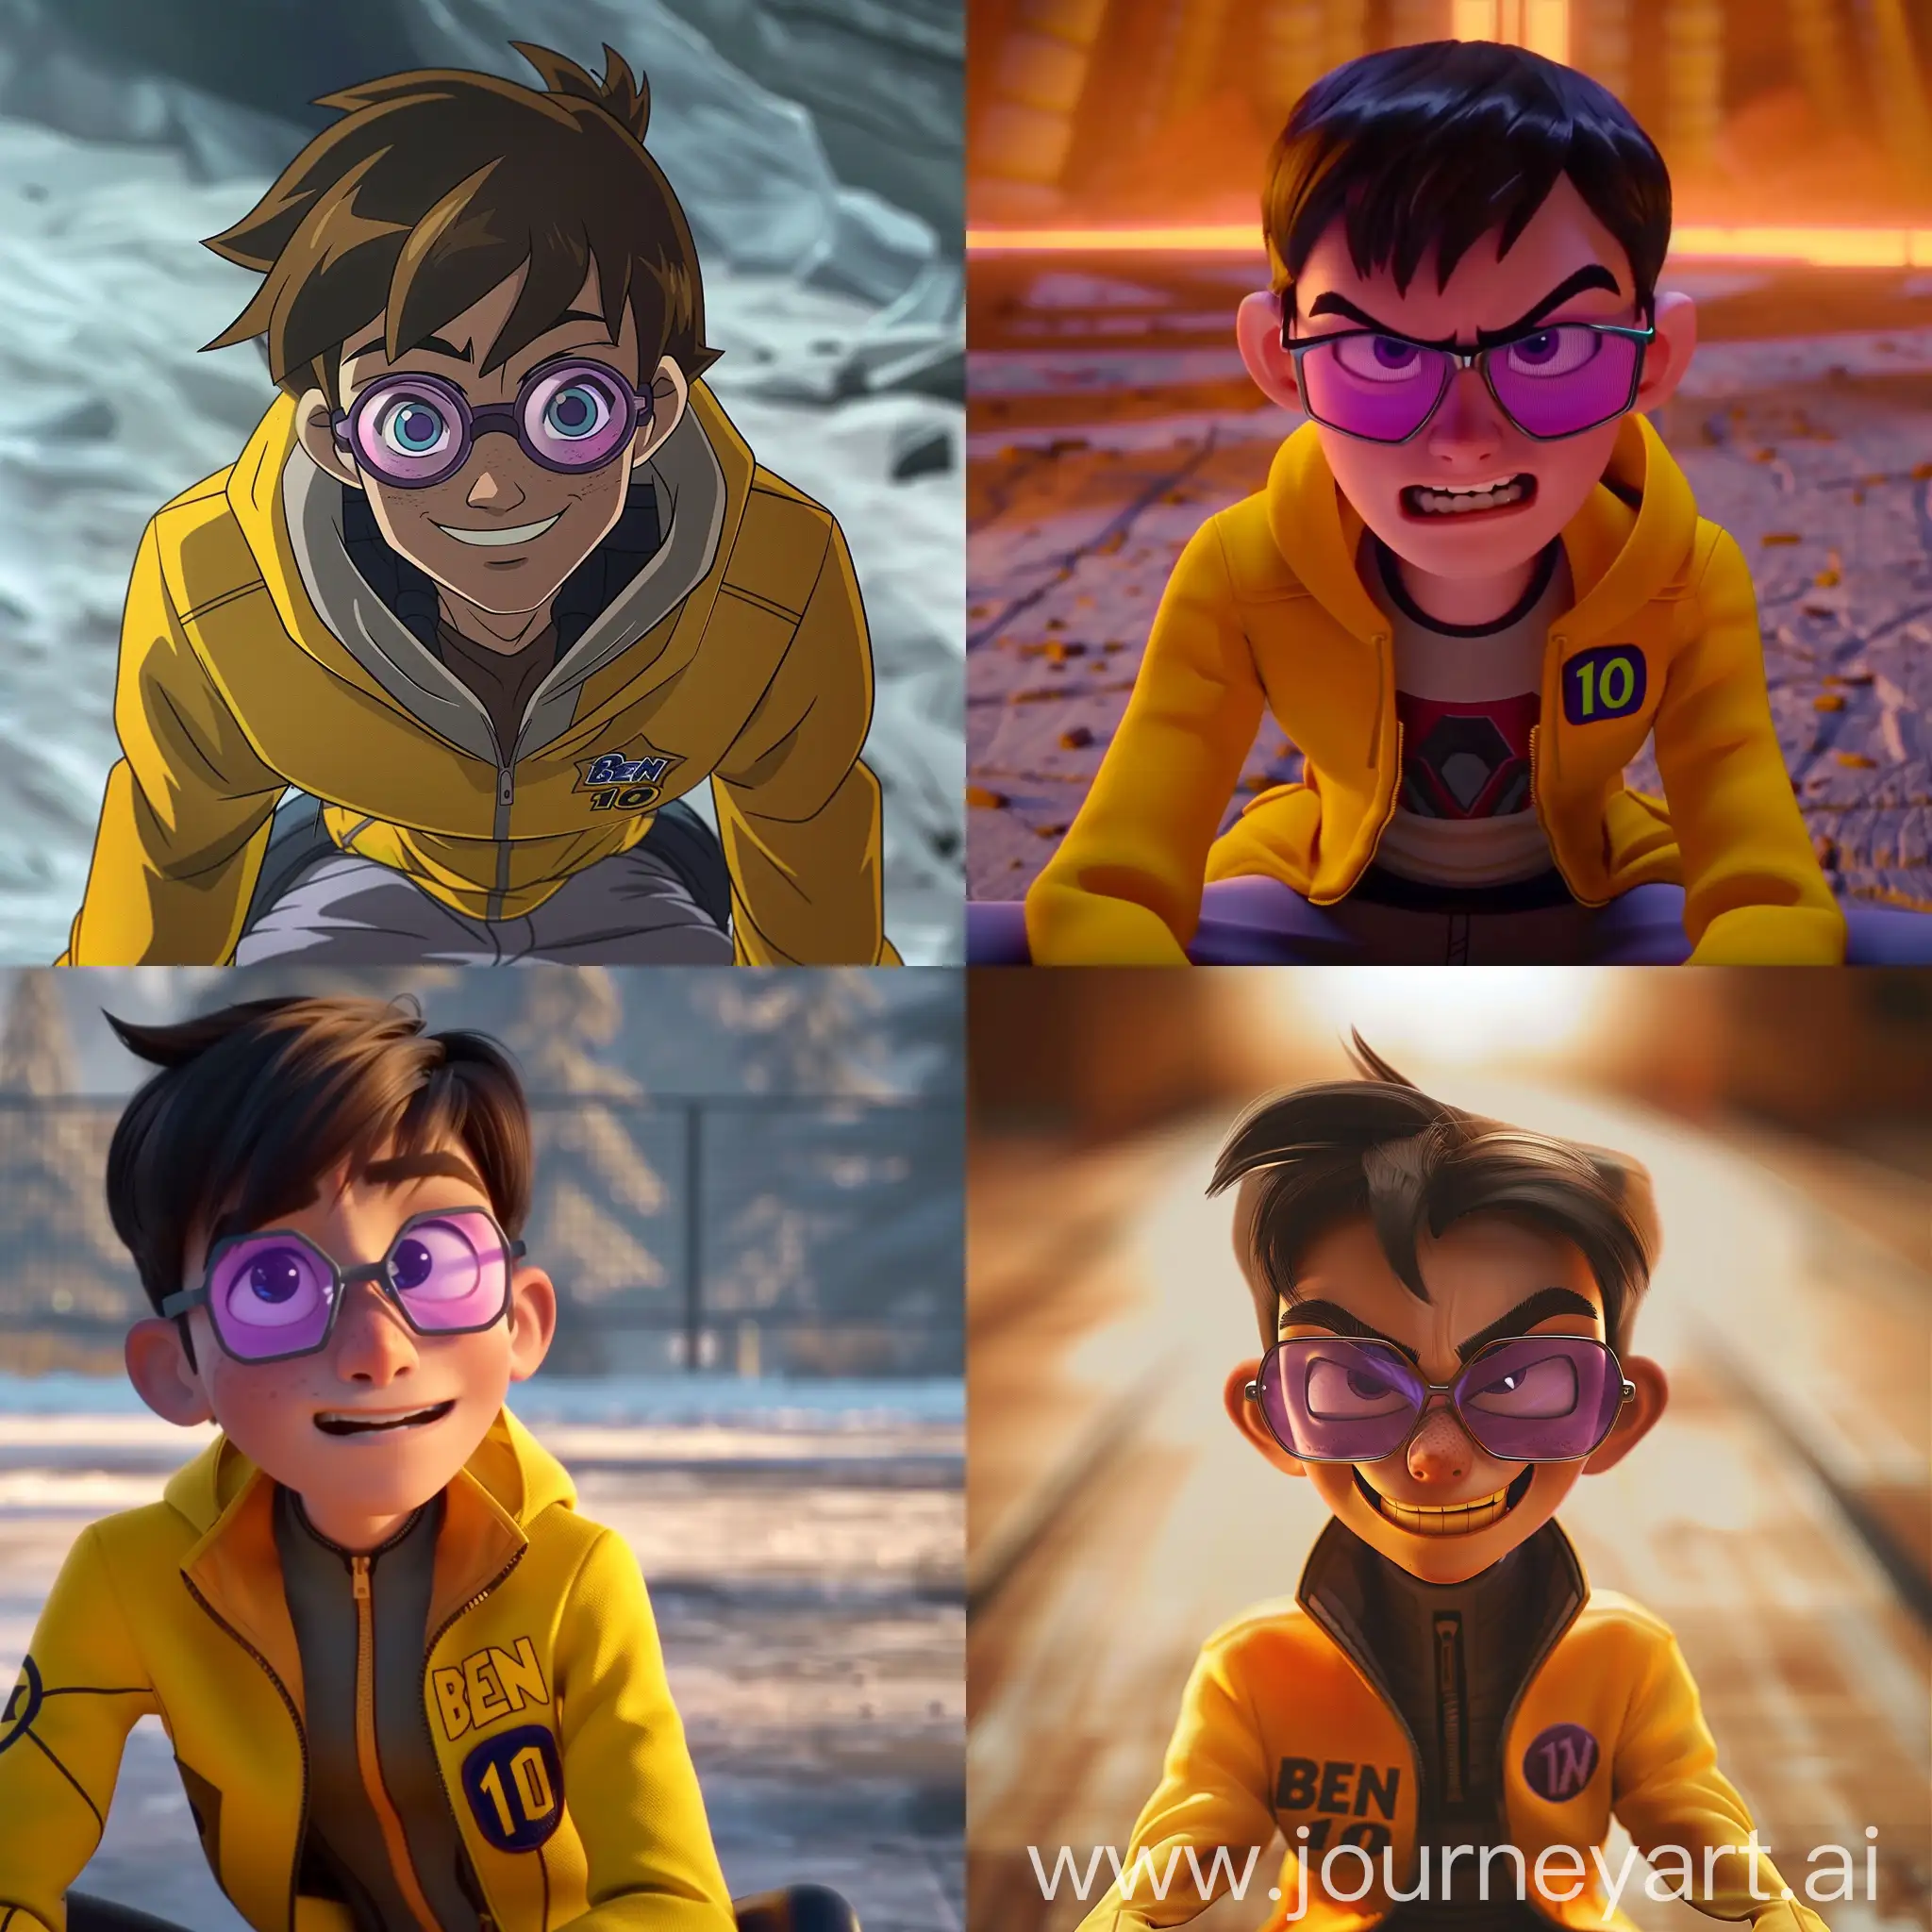 Animated-Character-Smirking-in-Yellow-Jacket-with-Purple-and-Grey-Glasses